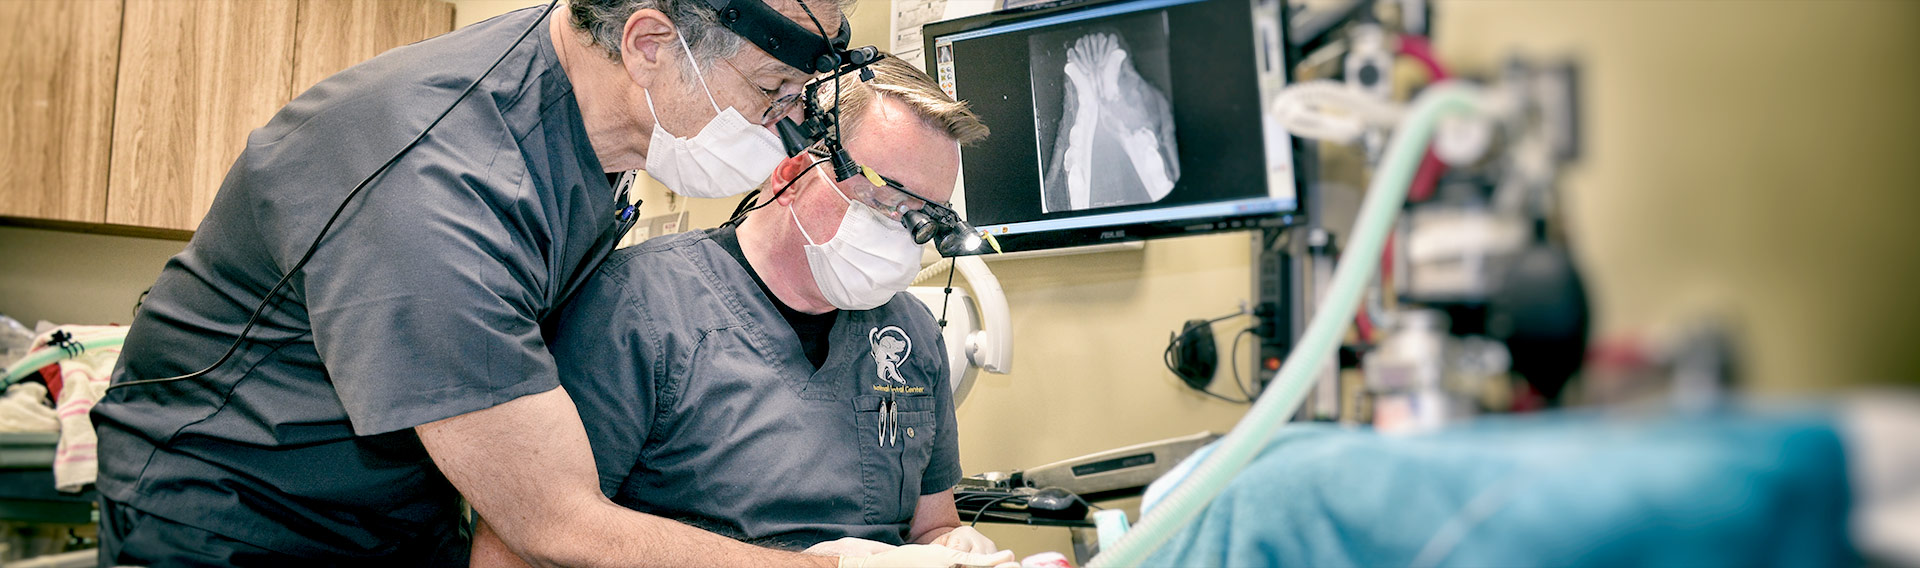 Veterinary Dentists Performing Oral Surgery